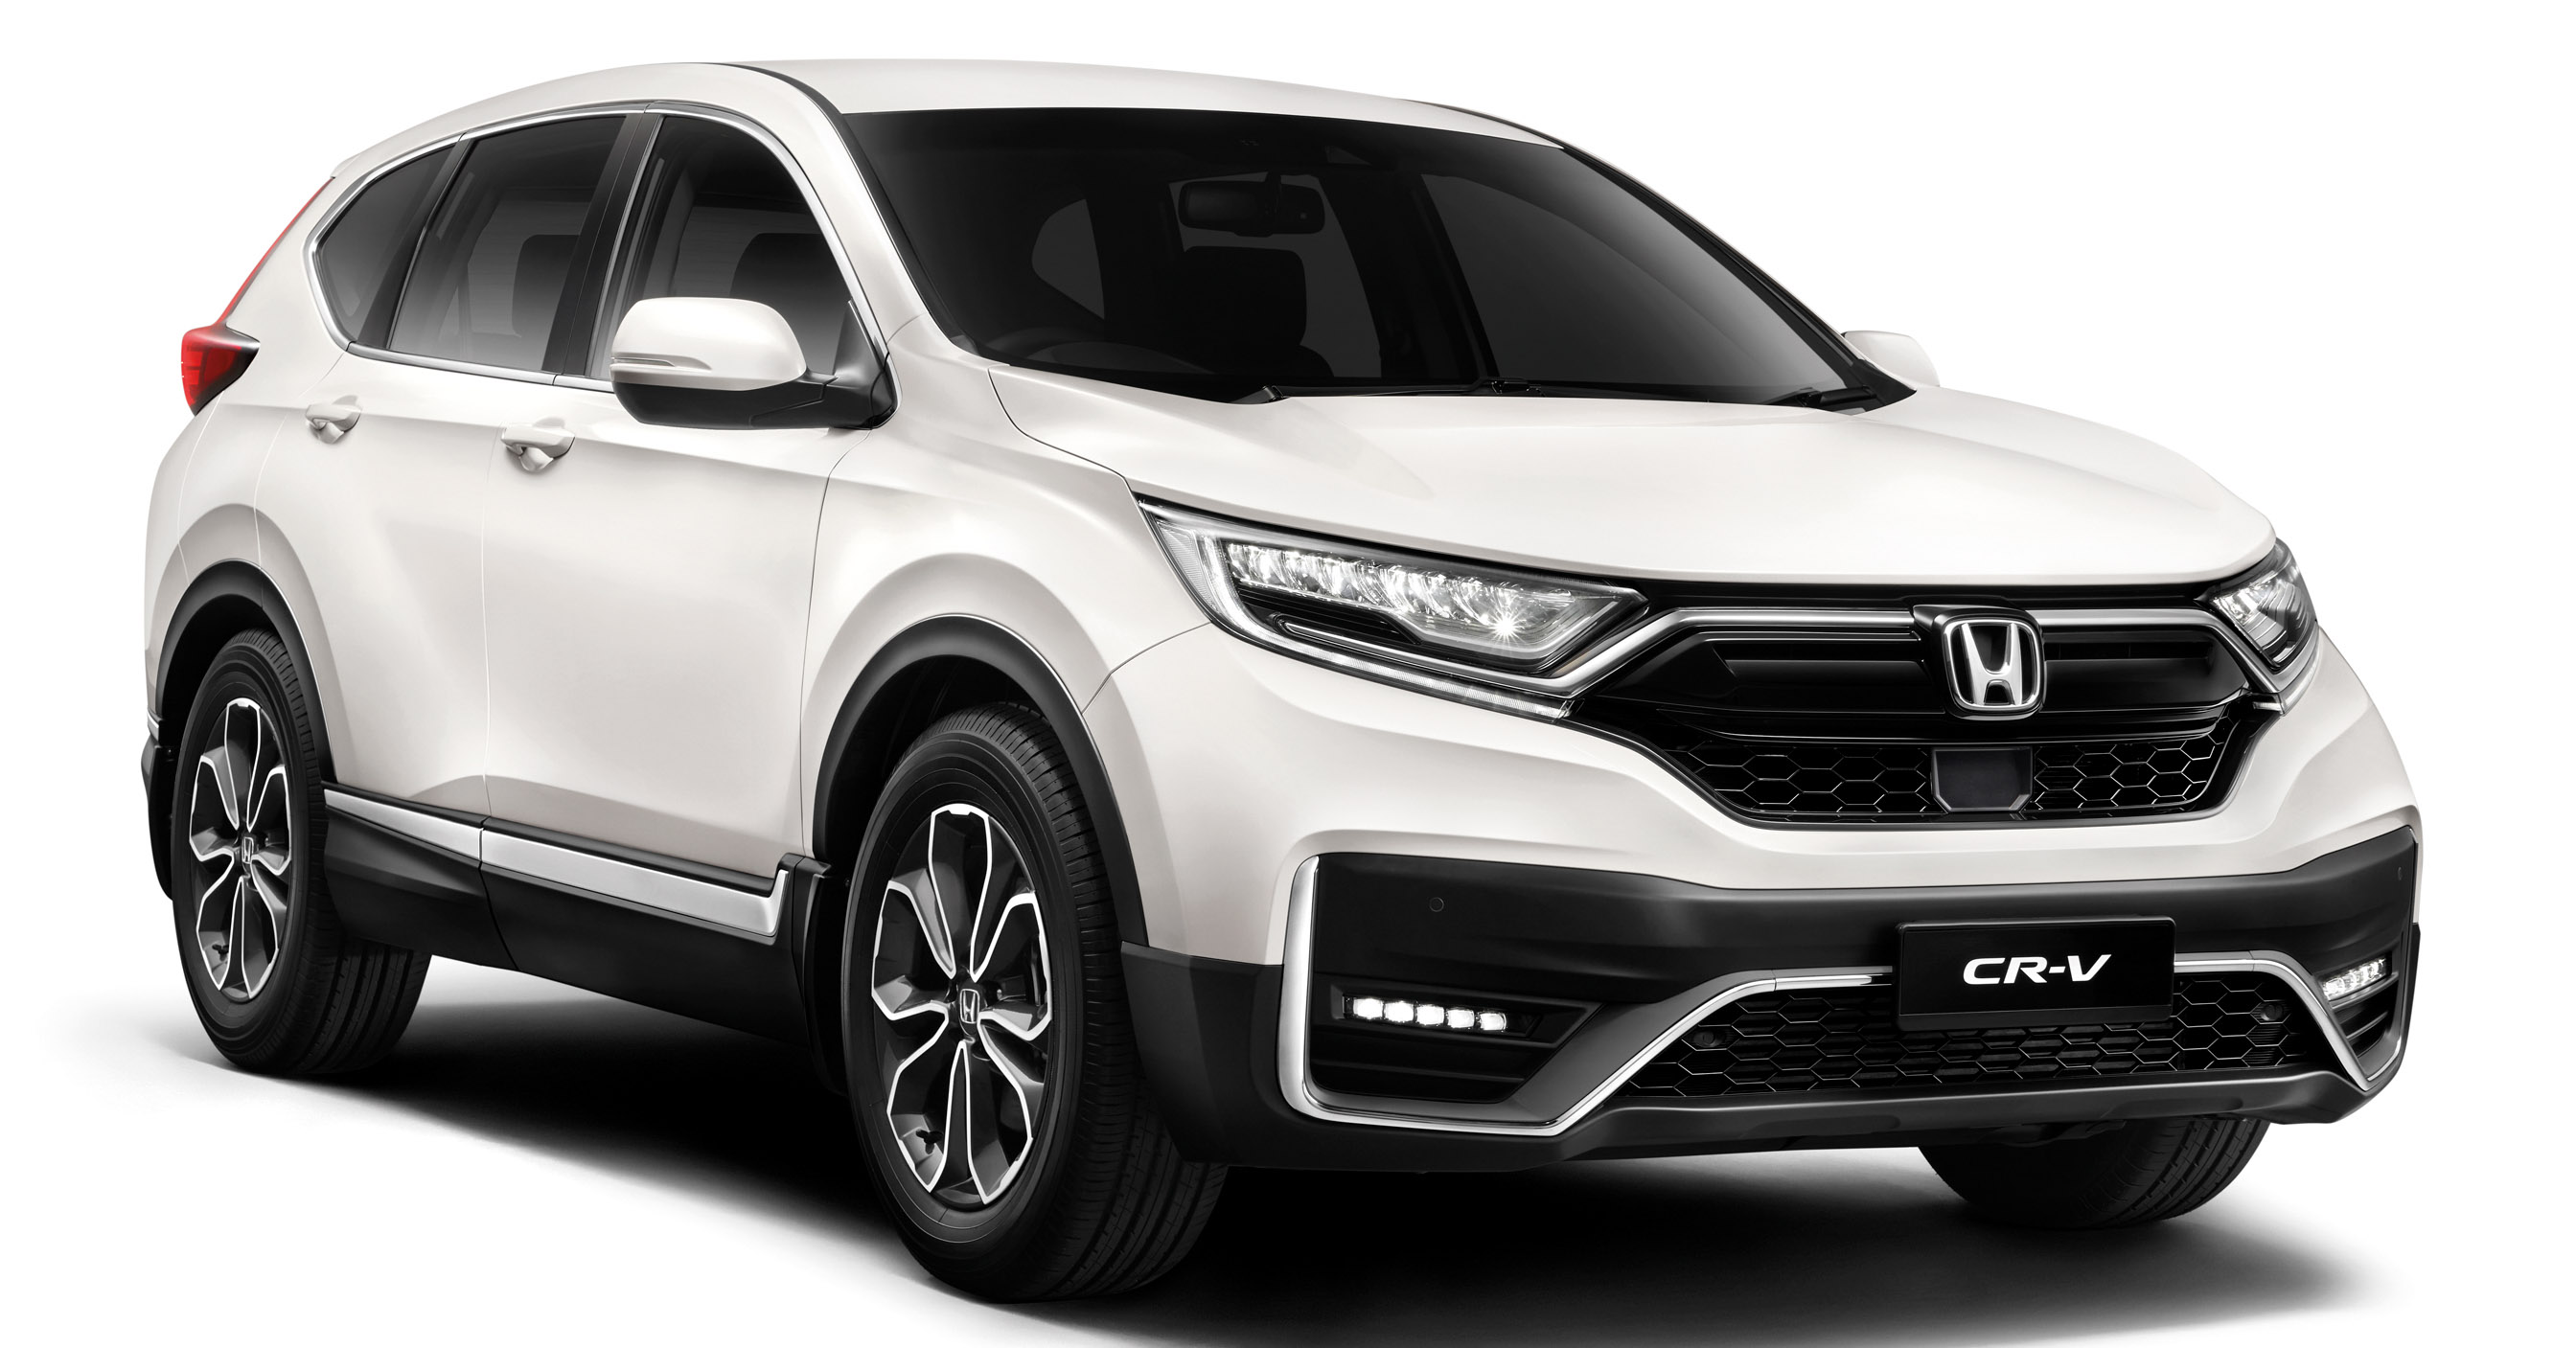 Honda Cr V Facelift Launched In Malaysia Two 1 5l Turbo One 2 0l Na New Styling Kit From Rm140k Paultan Org